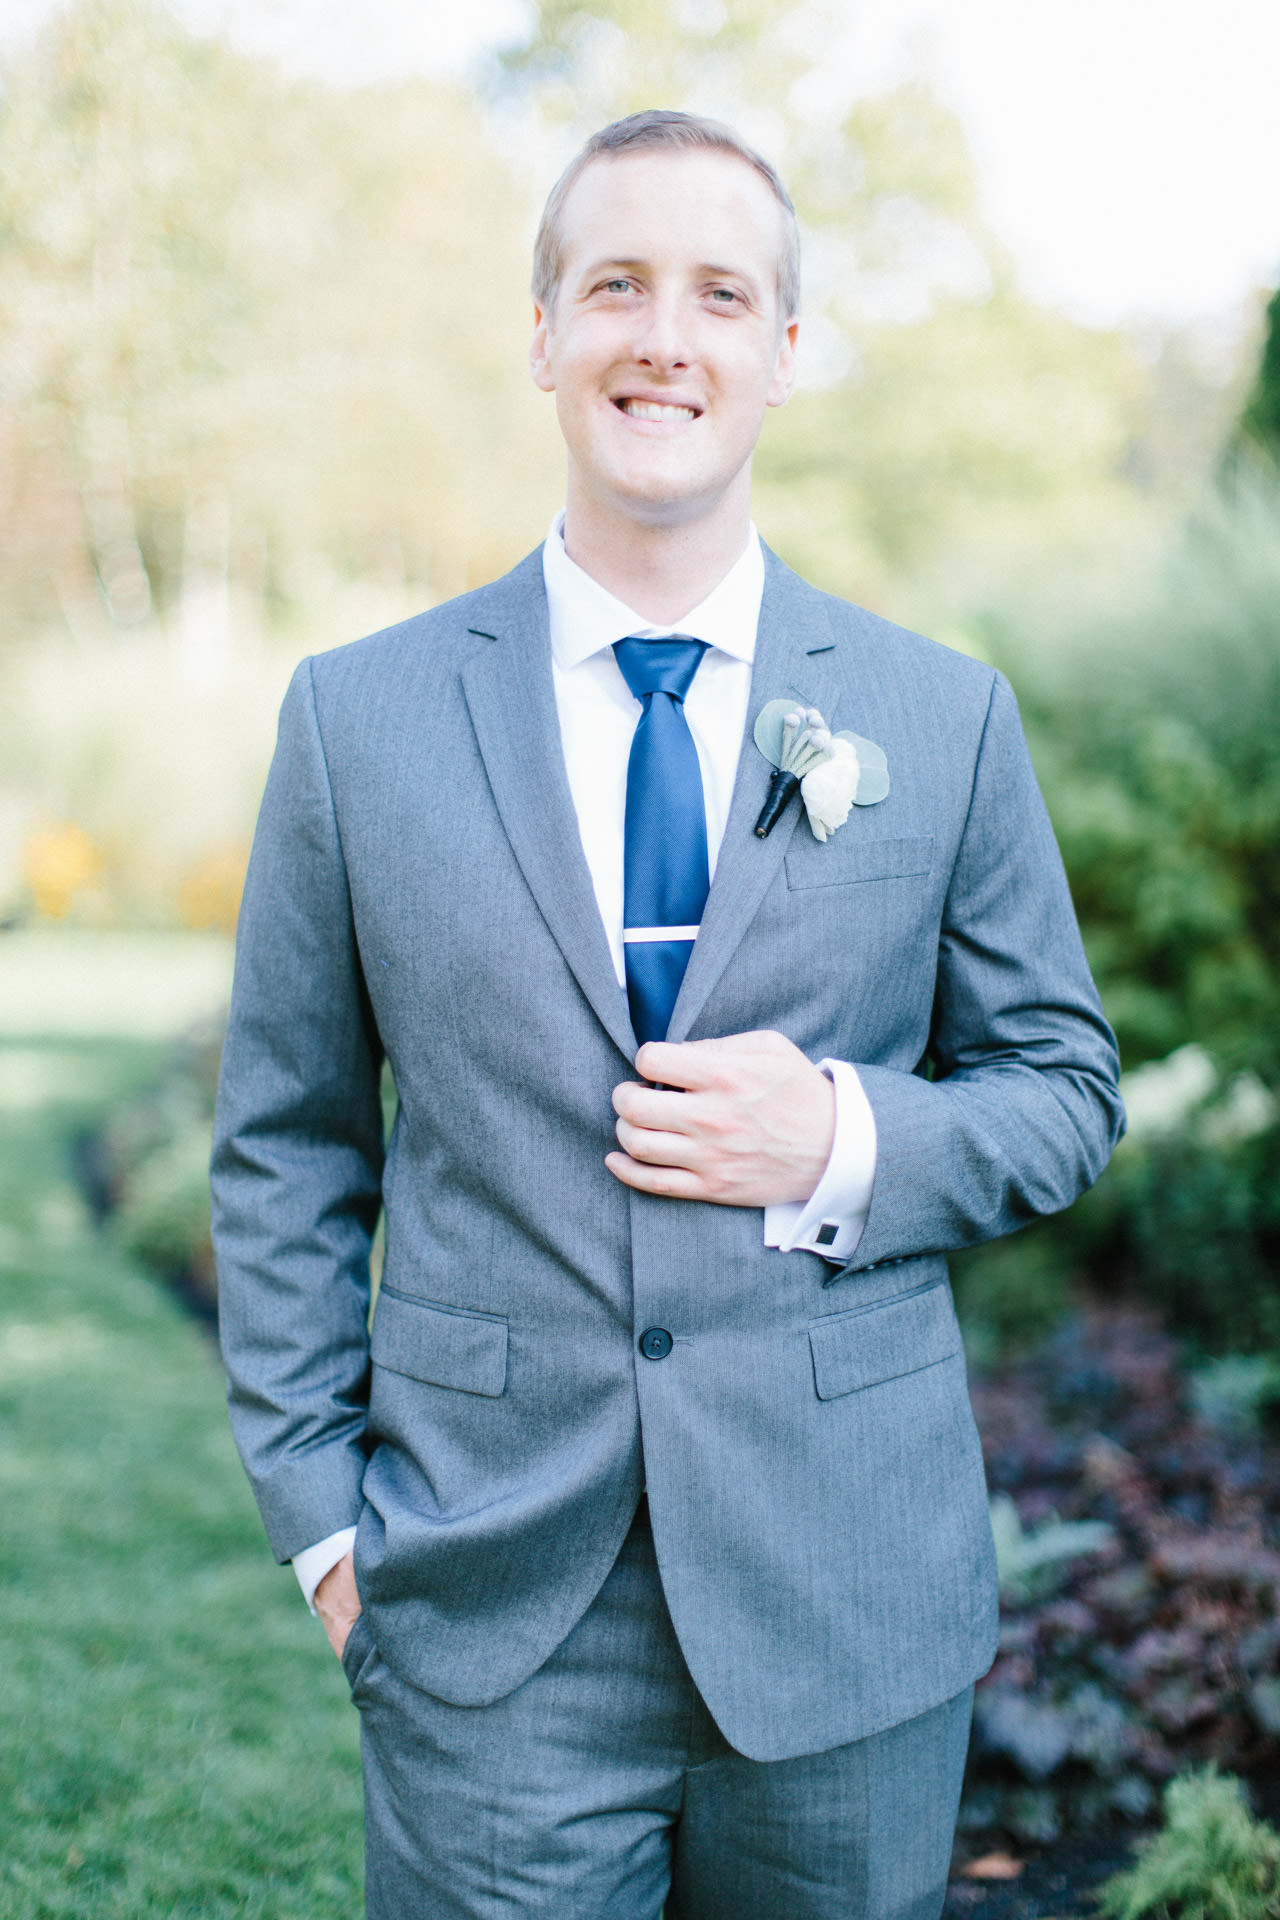 Groom posing for a photograph during his wedding at The Gardens at Elm Bank in Wellesley, MA